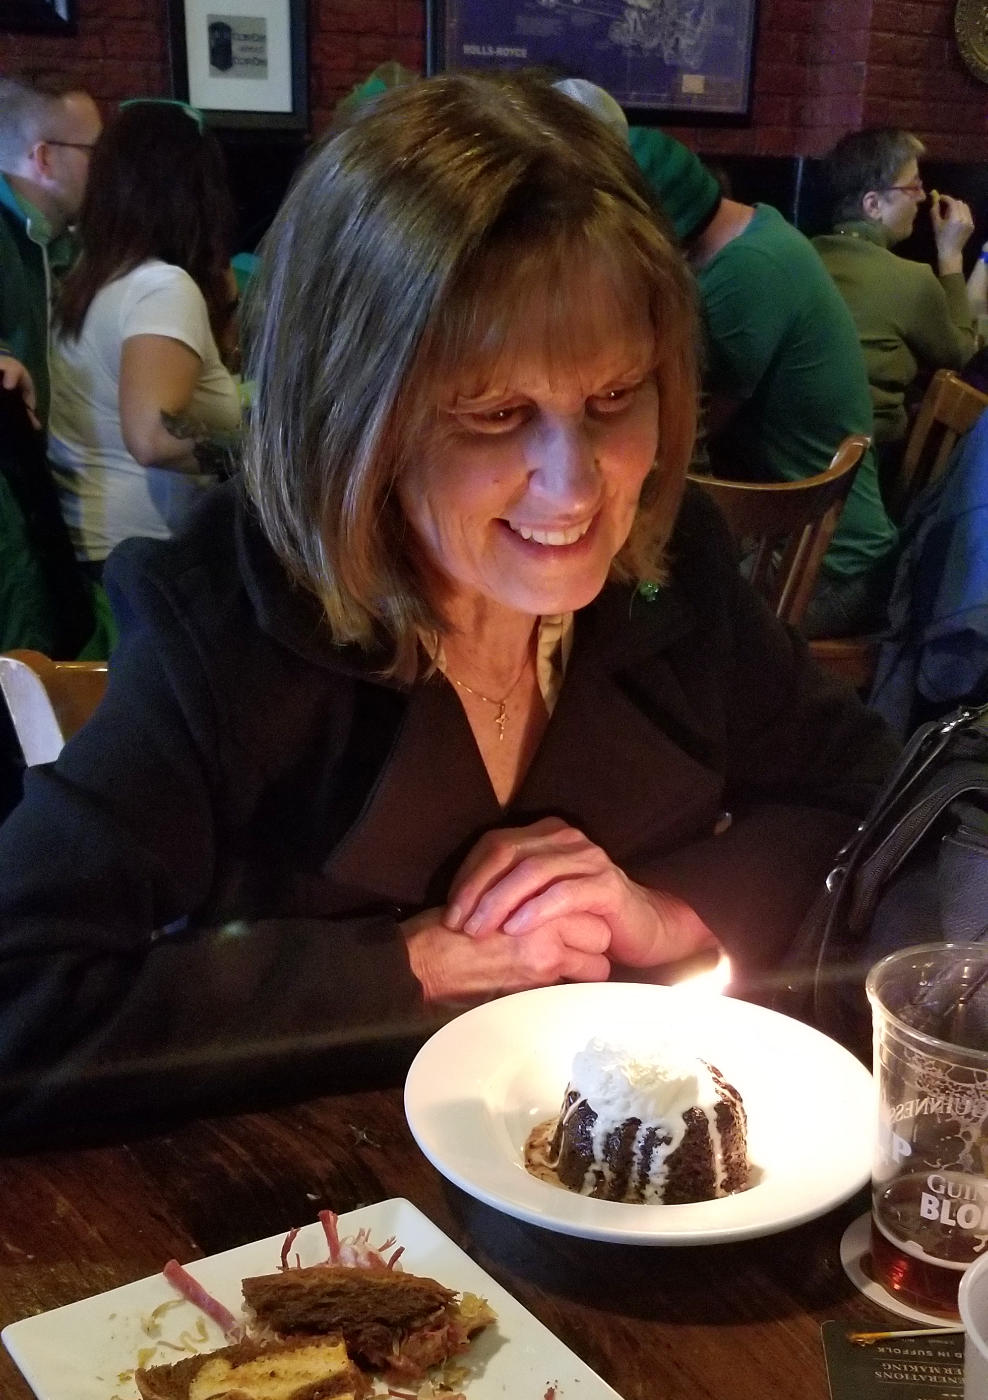 Smiling woman with face lit by a birthday dessert with candle in a restaurant